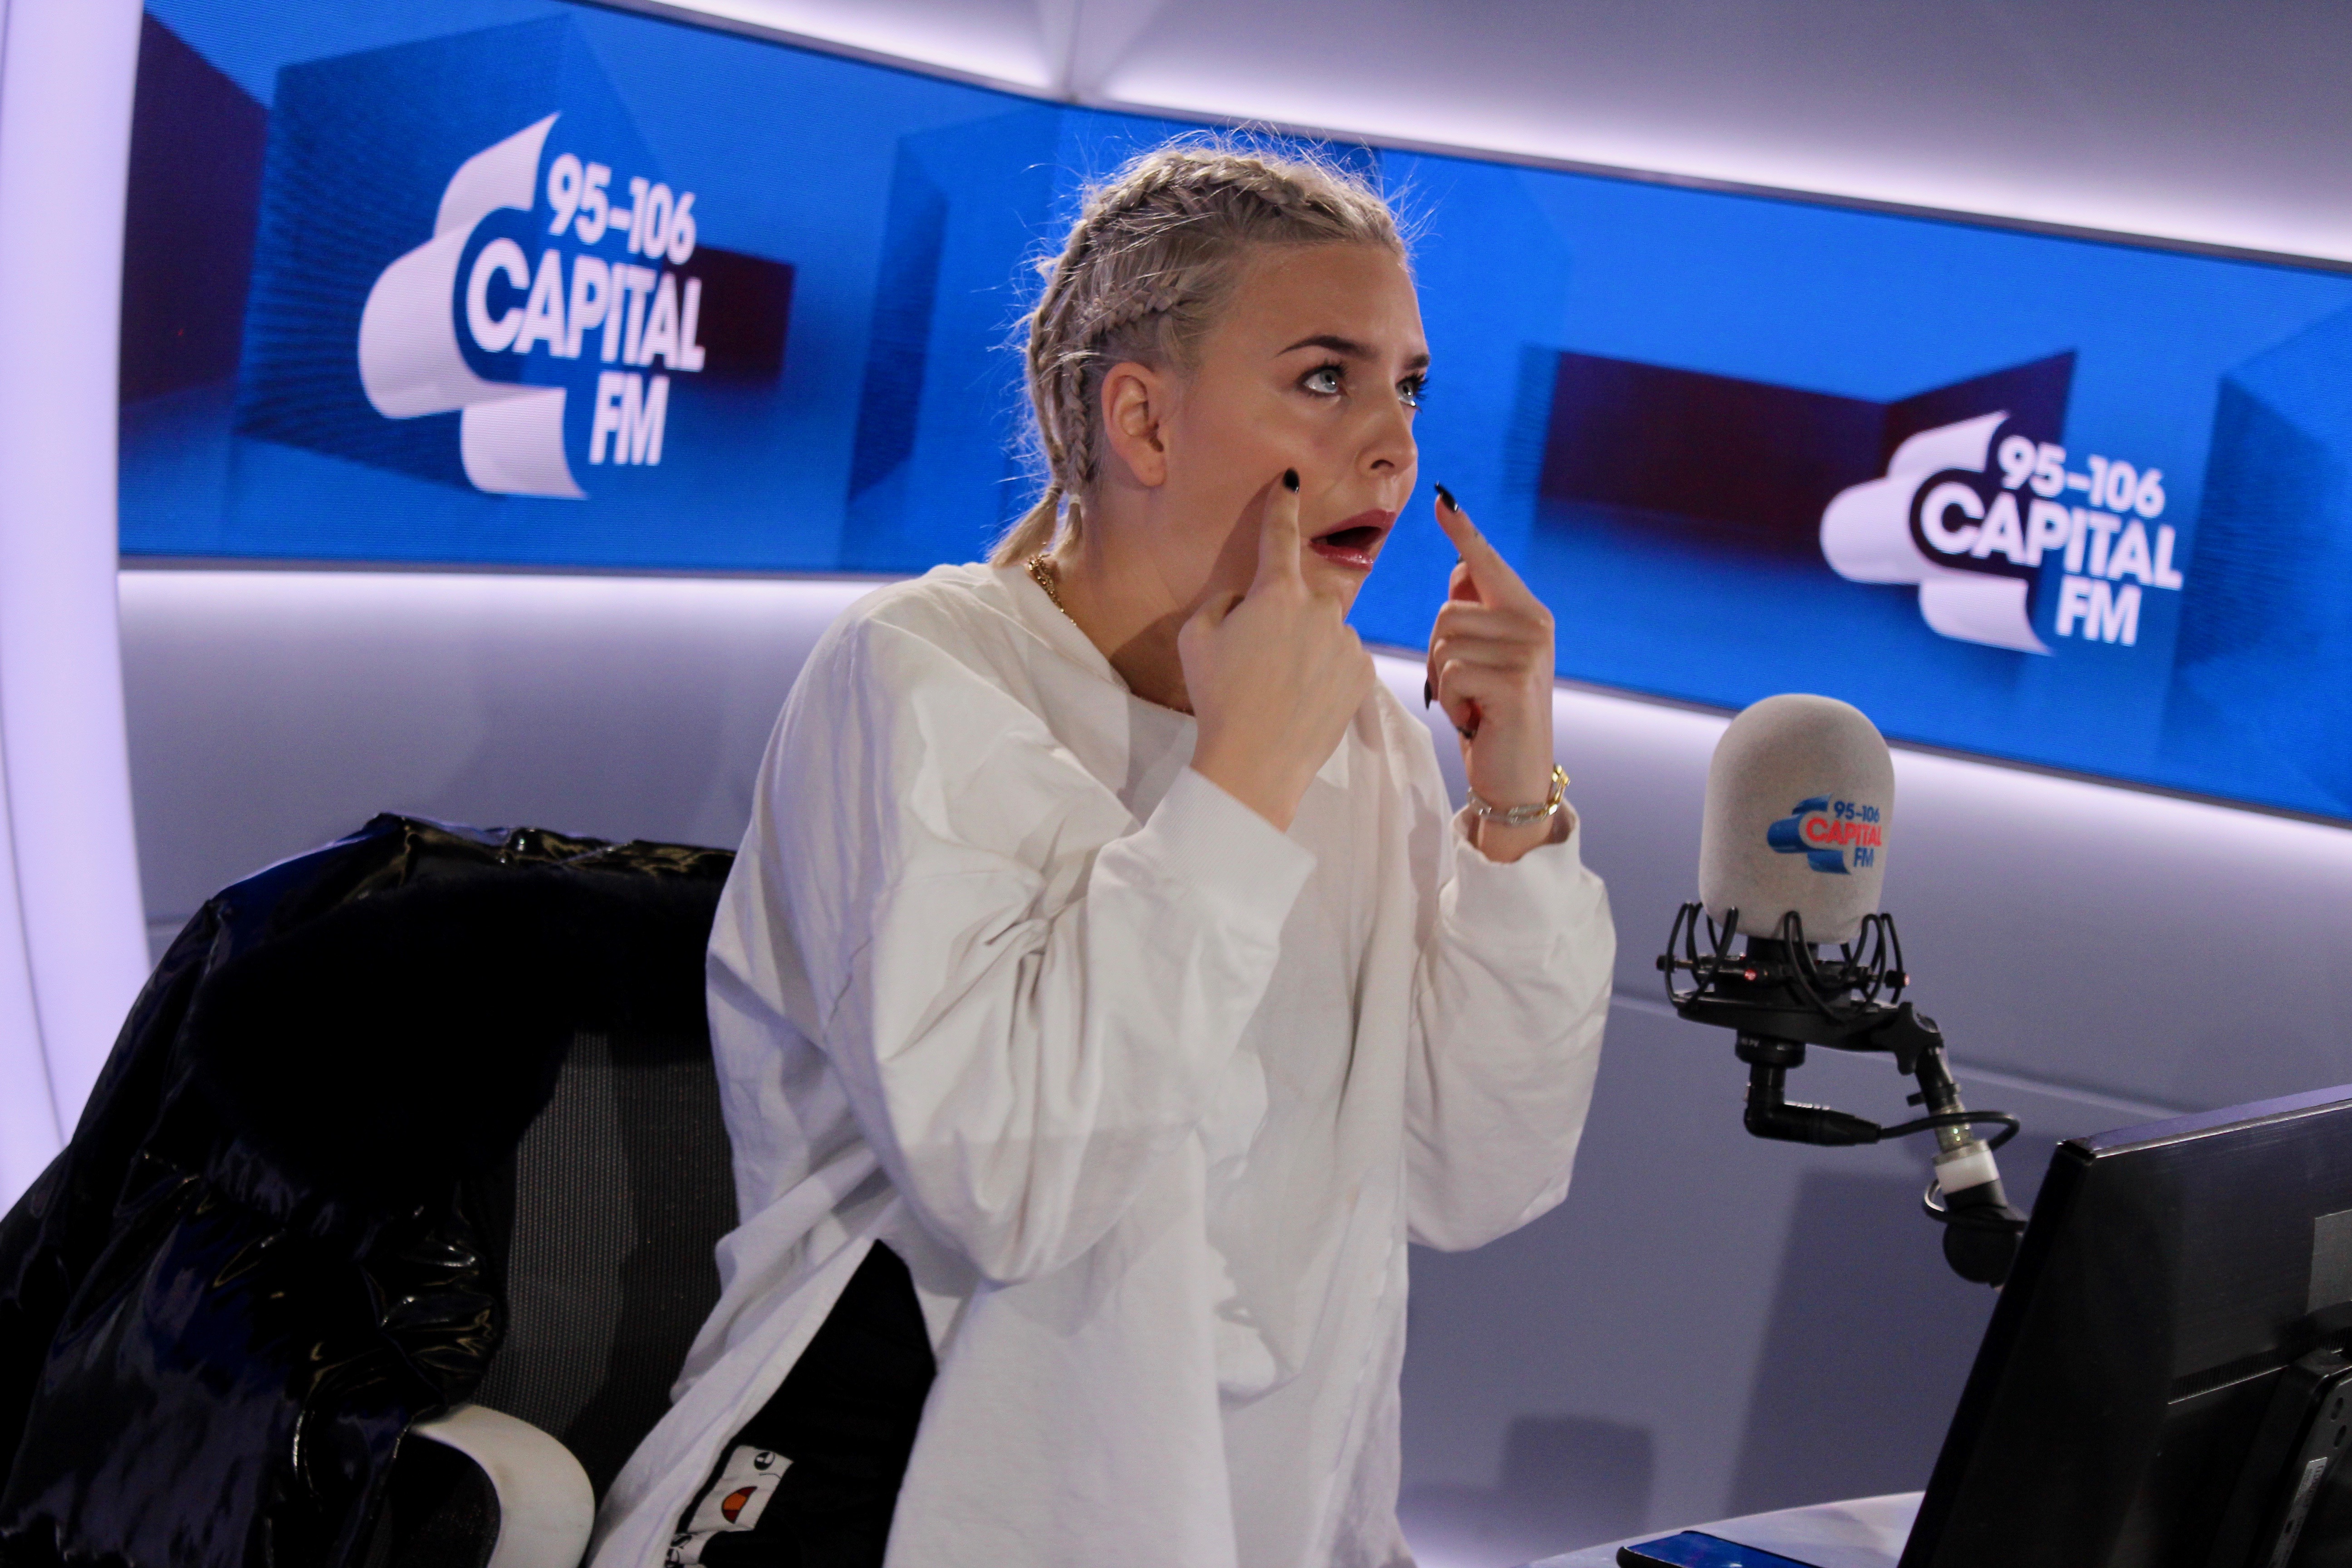 Anne-Marie with Capital FM